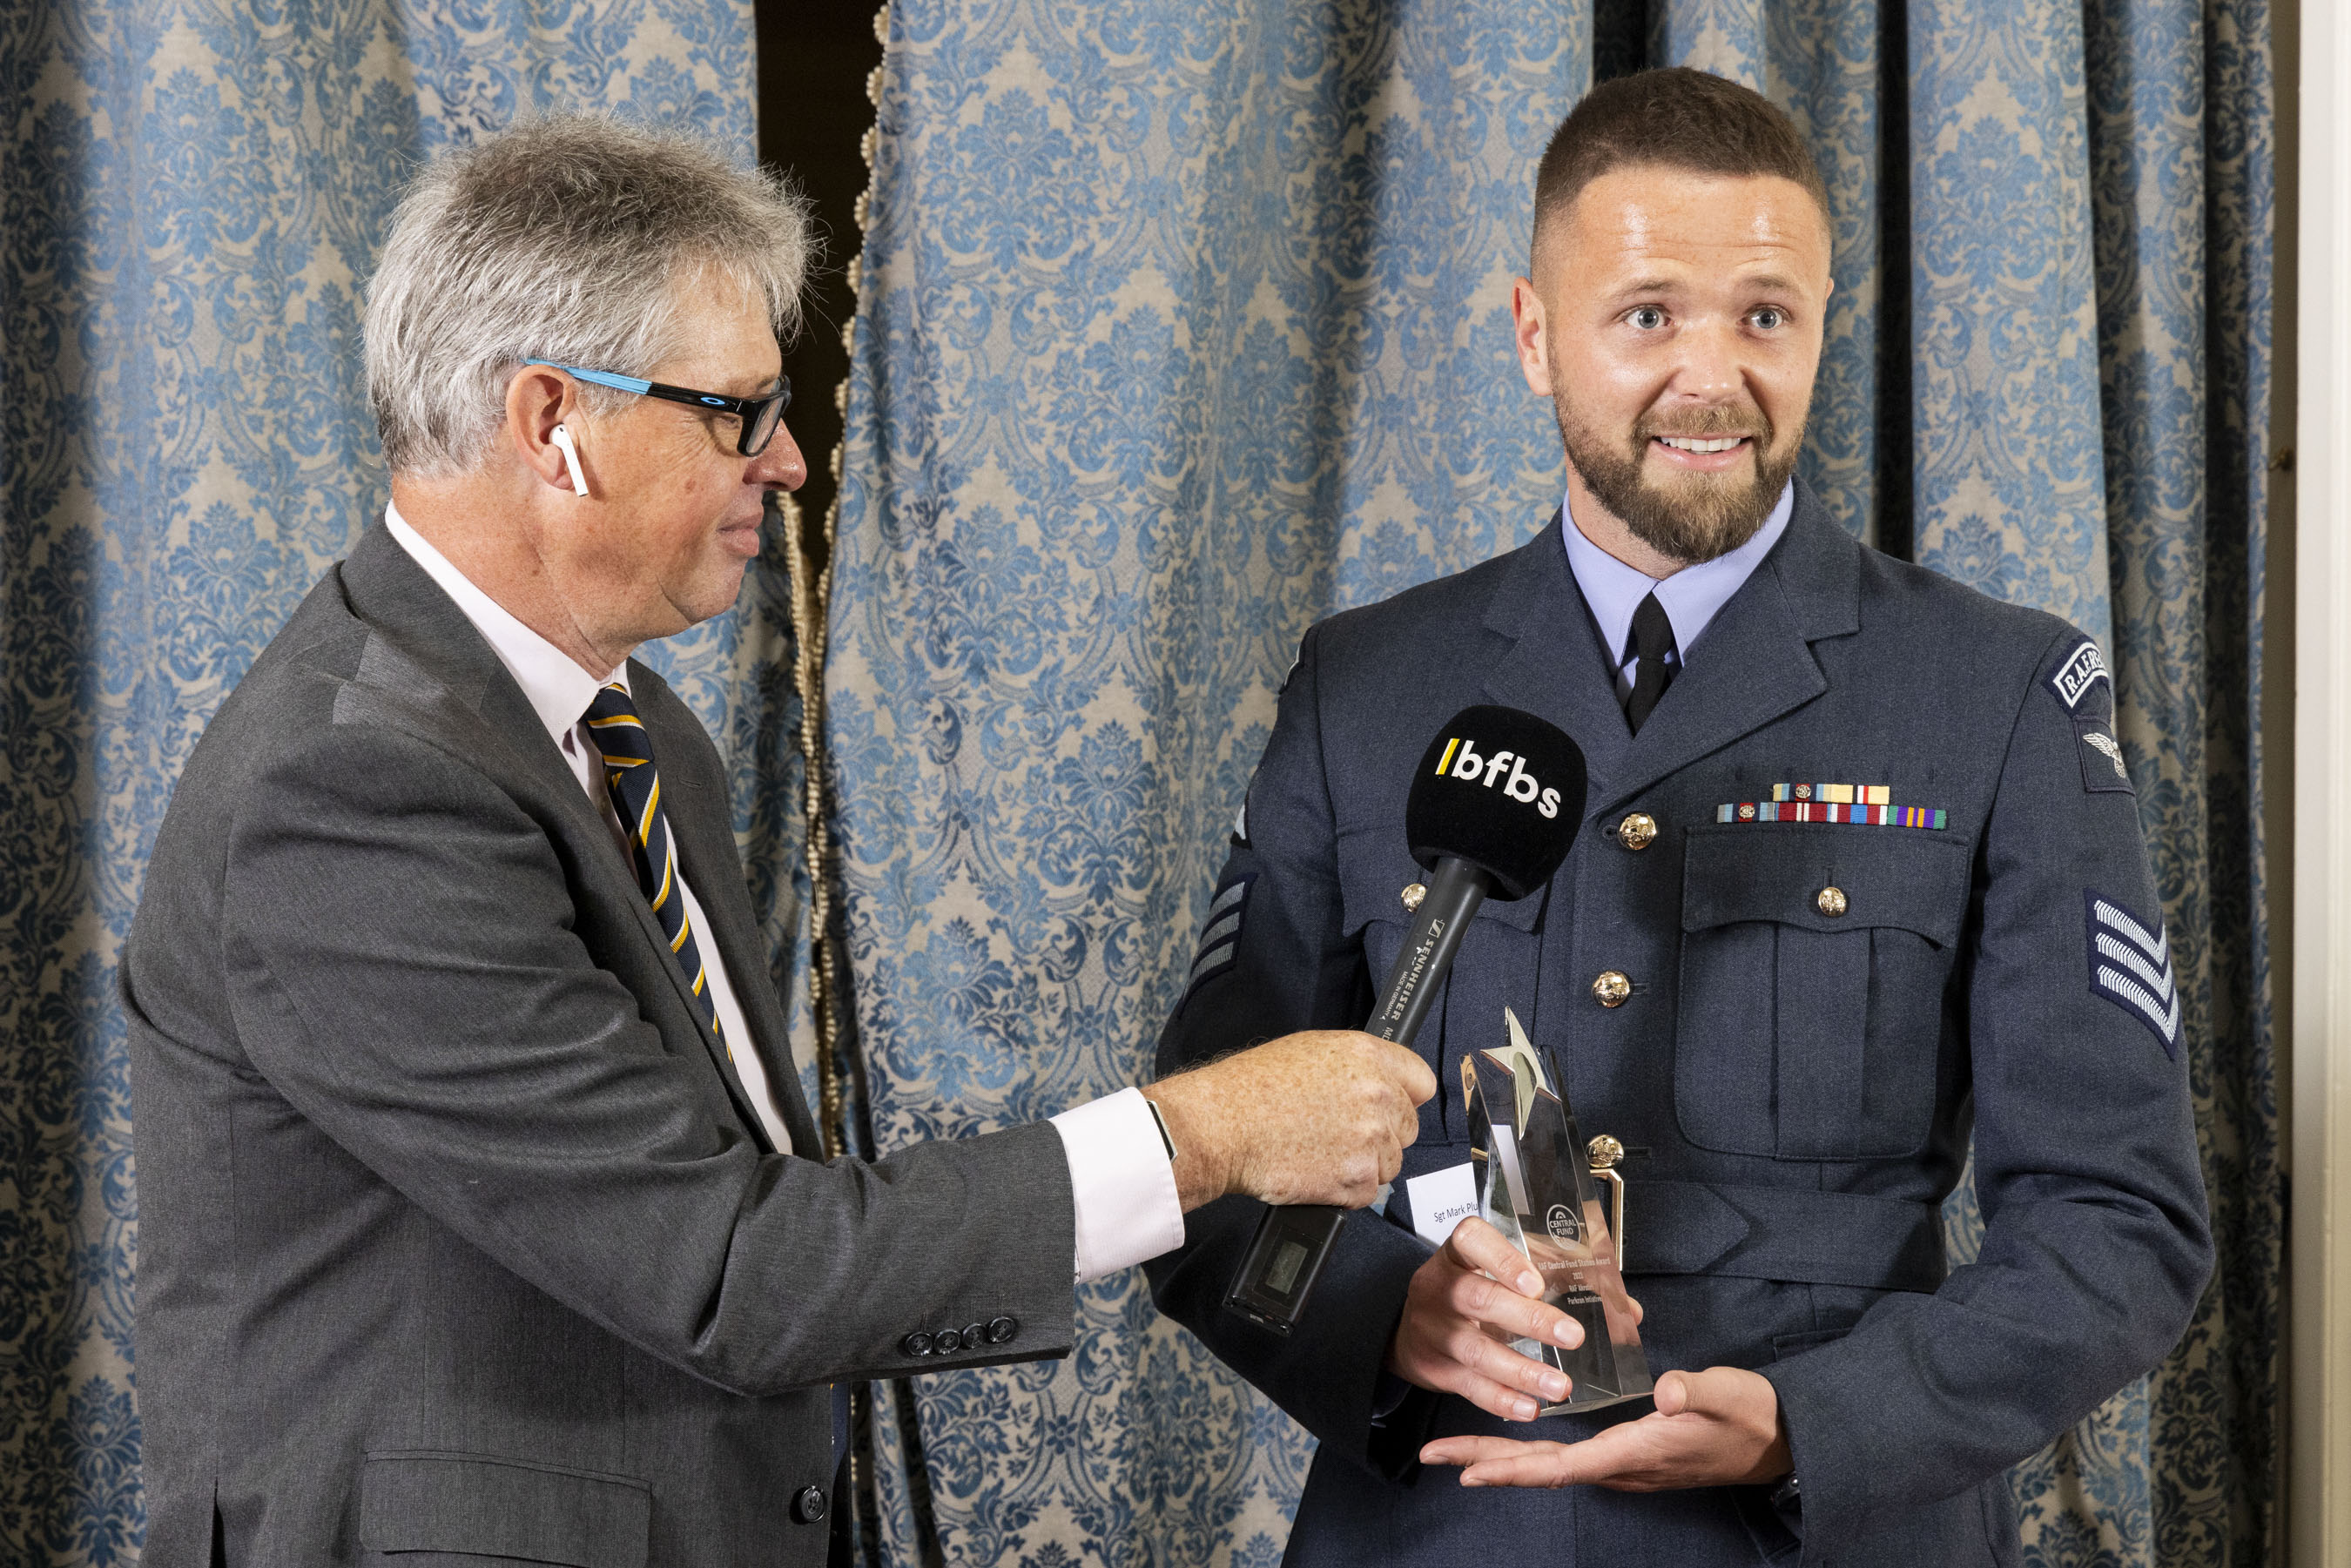 Award for Station of the Year being received by RAF Akrotiri